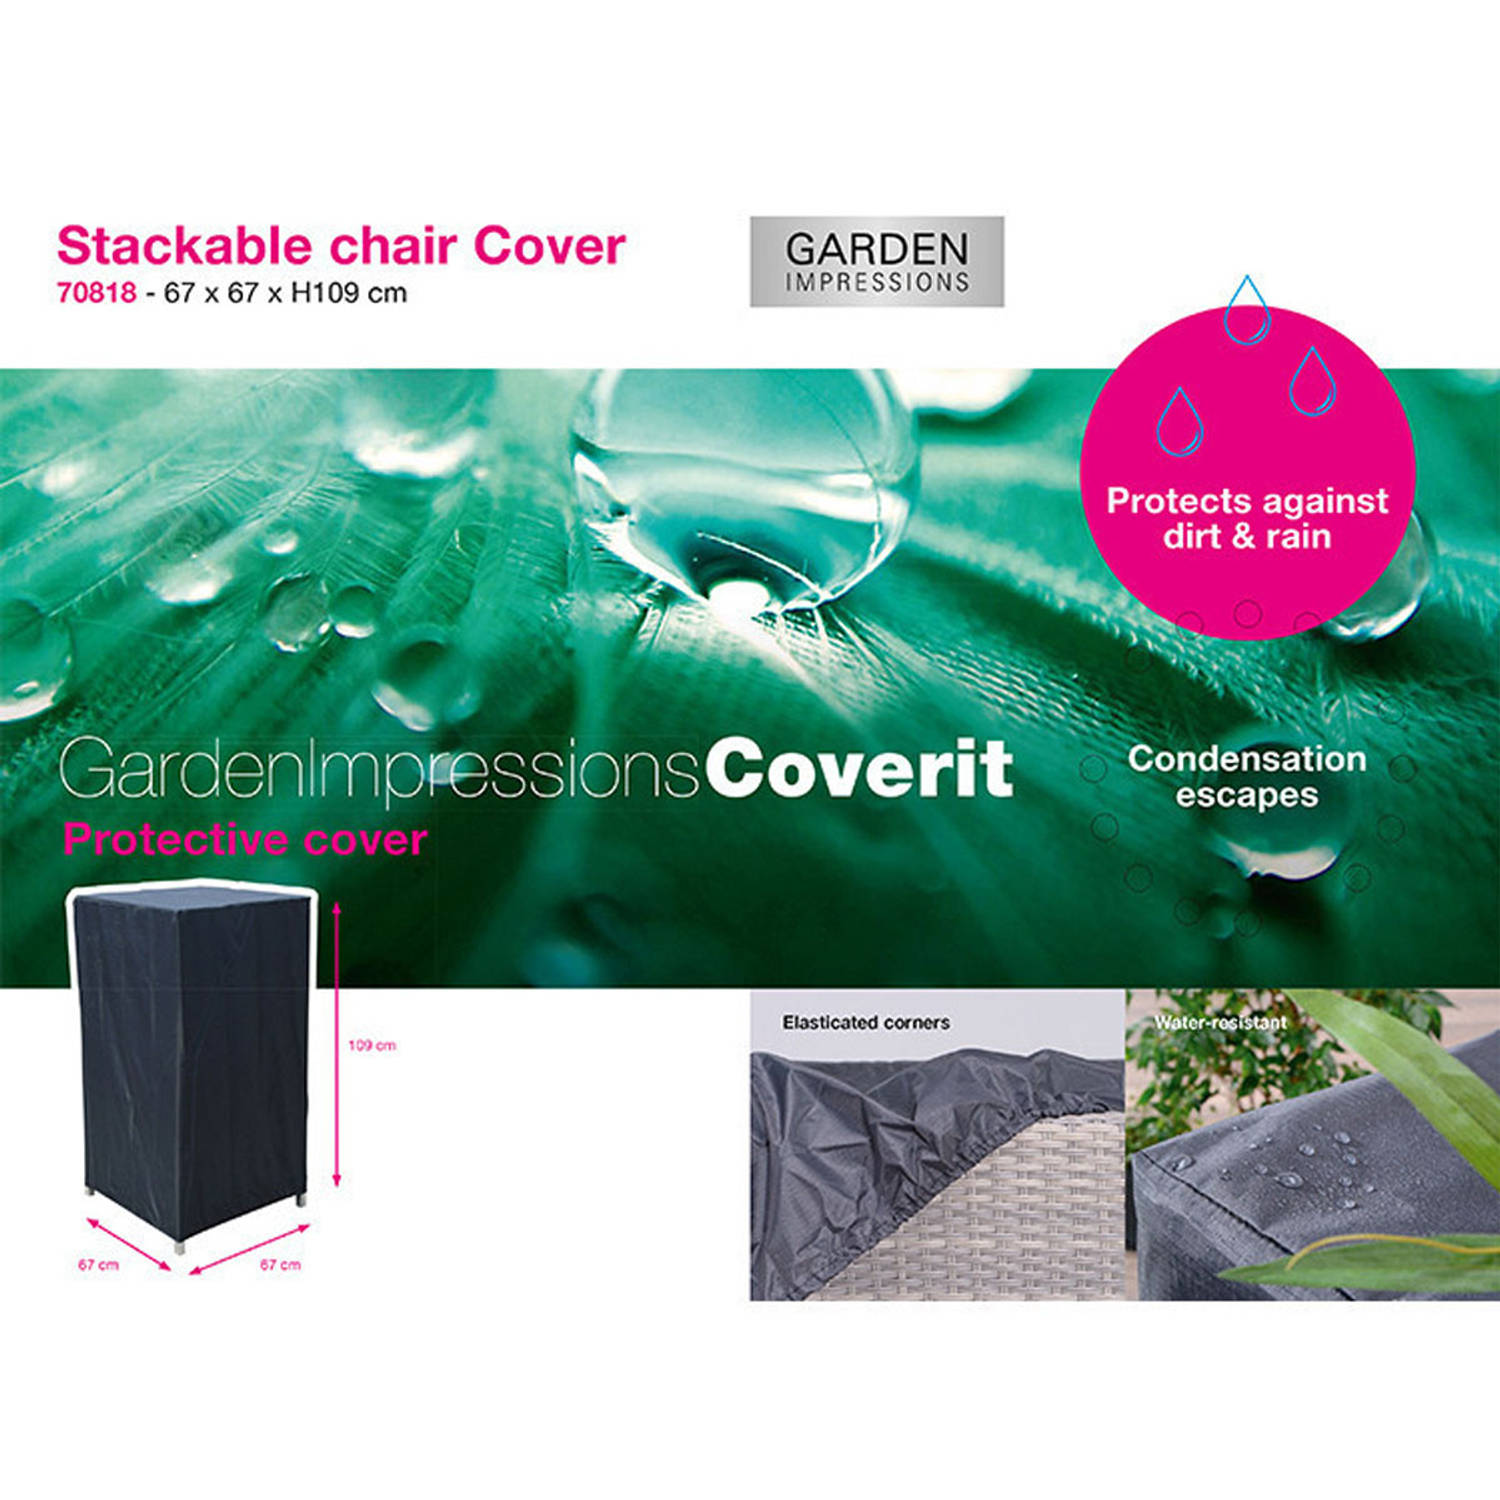 Garden Impressions Coverit stapelbare stoel hoes